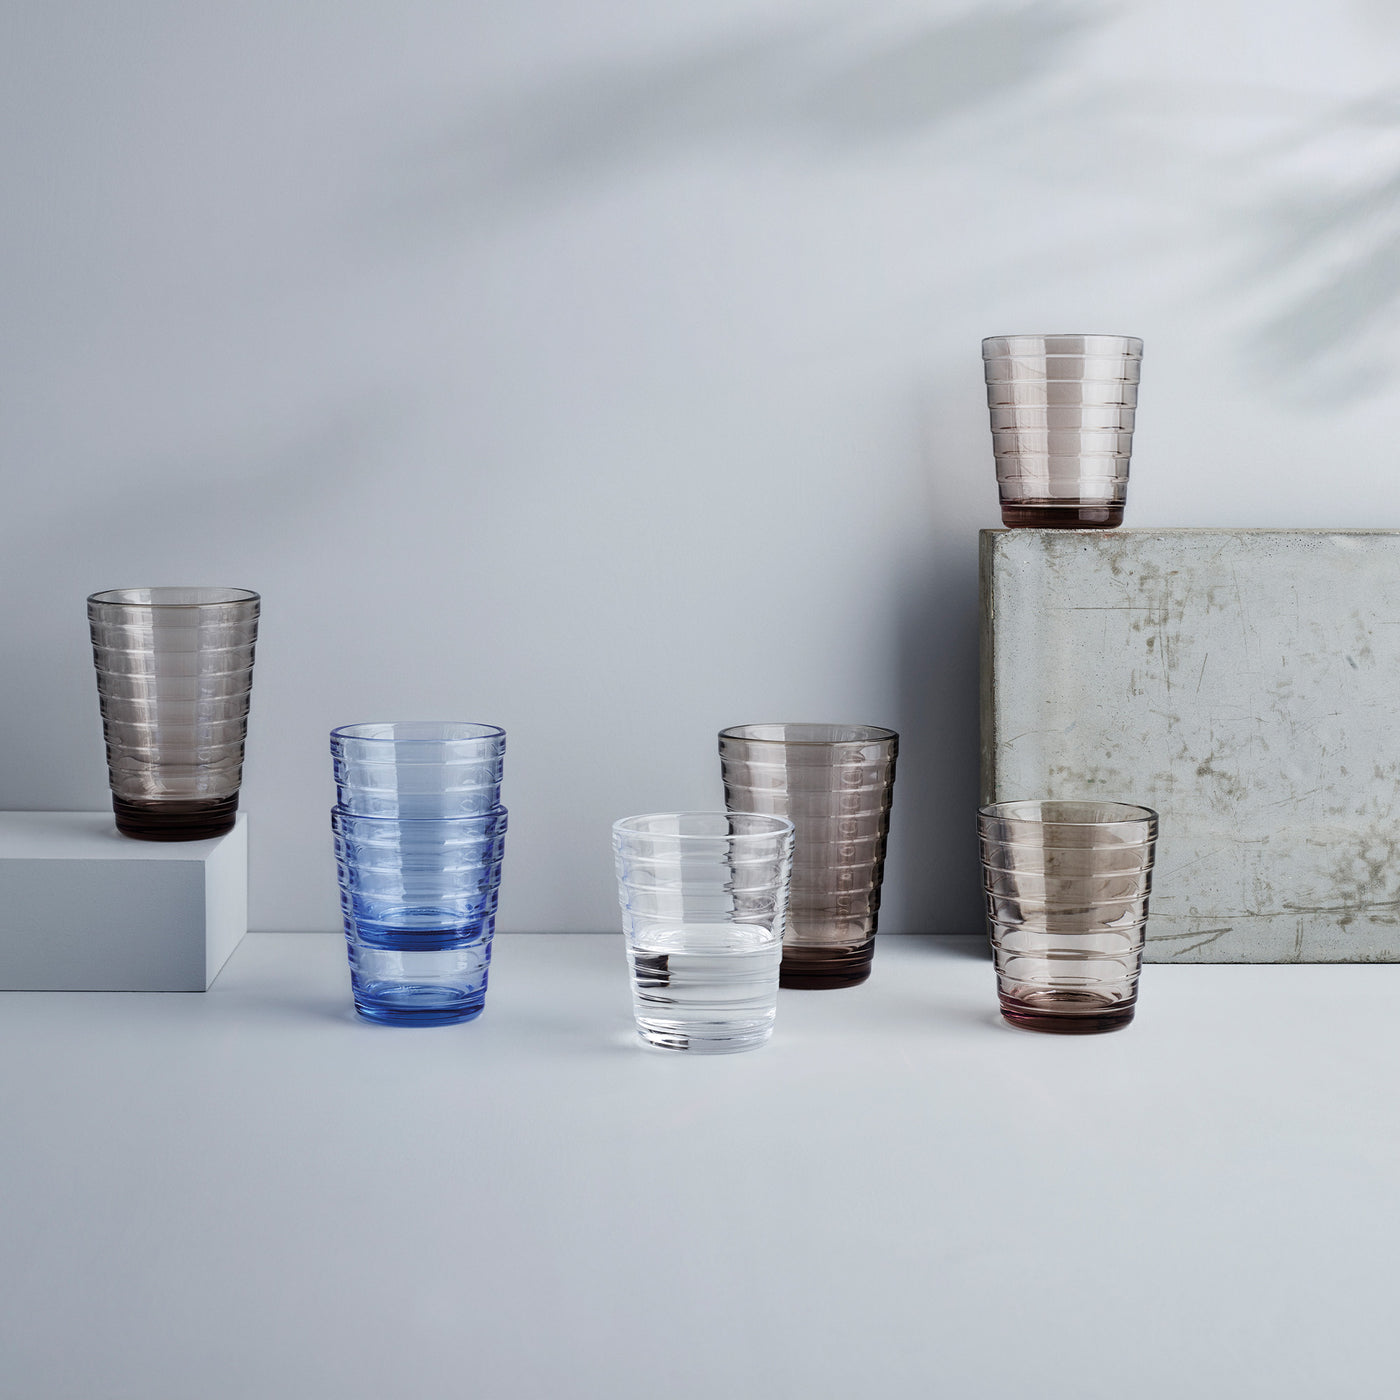 iittala Aino Aalto Tumblers in linen, light blue and clear colors